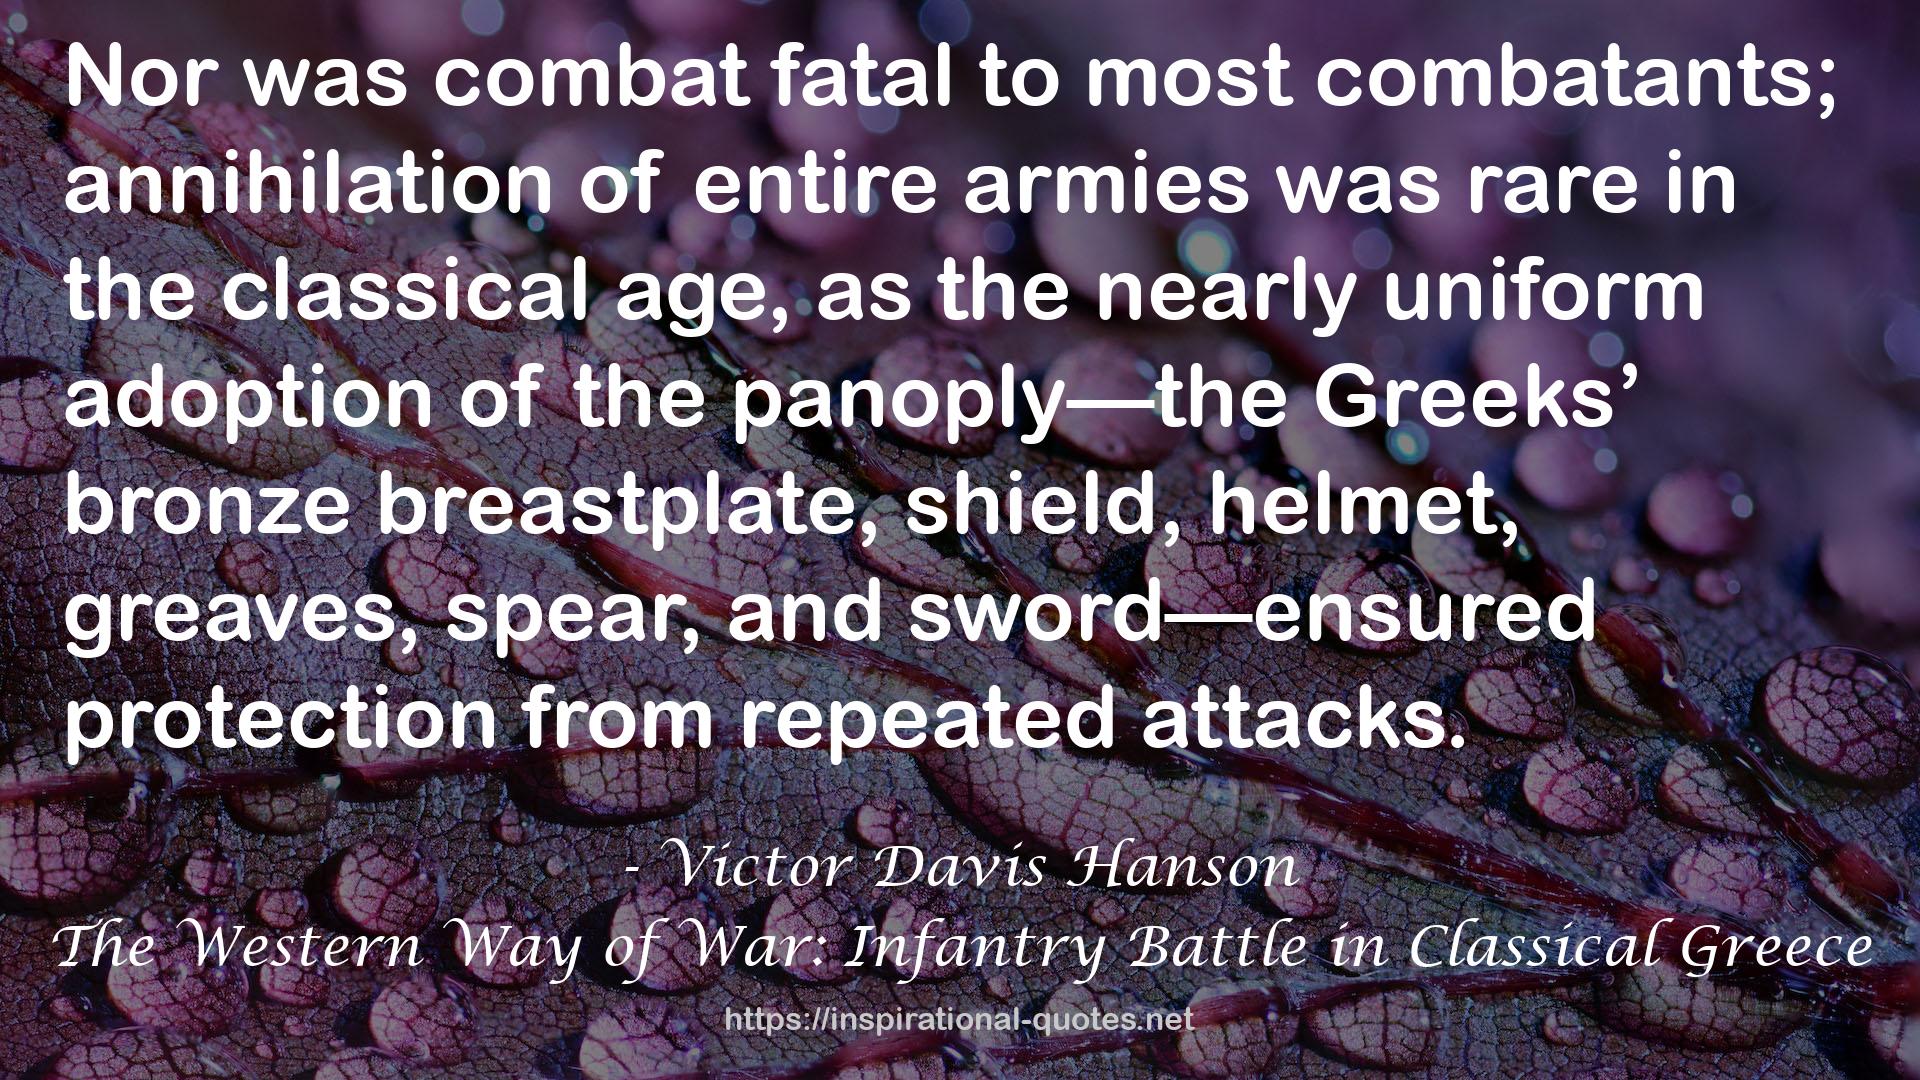 The Western Way of War: Infantry Battle in Classical Greece QUOTES